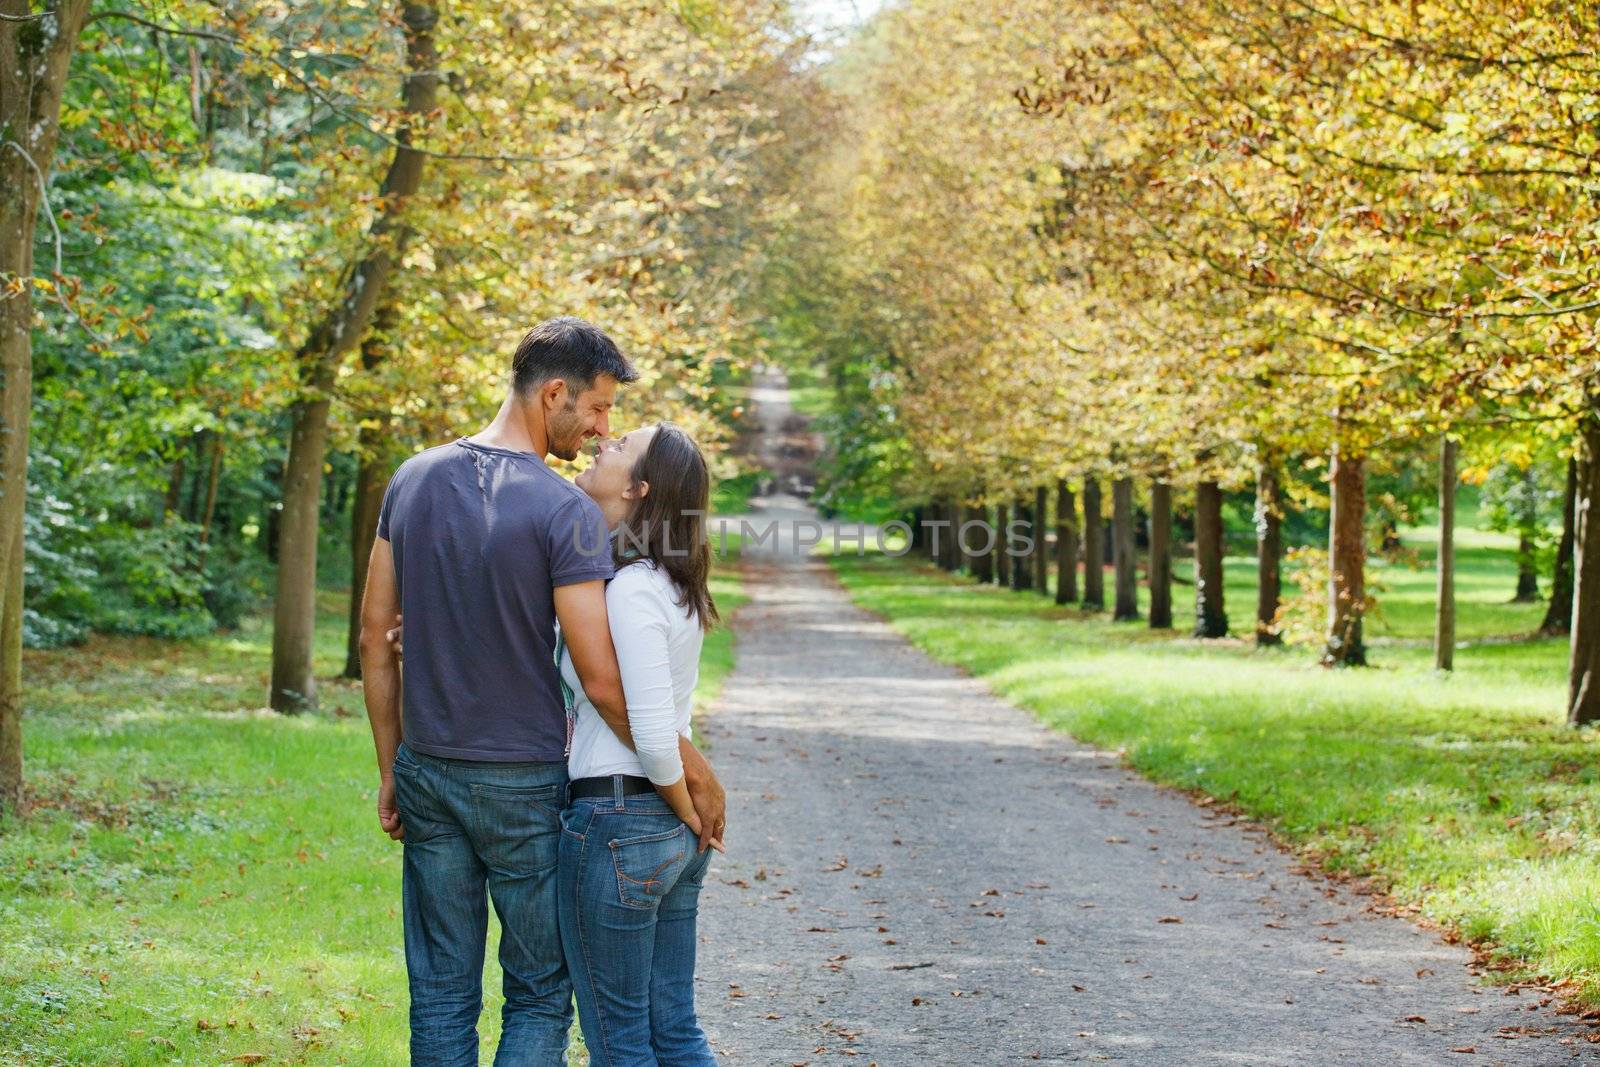 Romantic  Beautiful young couple walking in autumn park